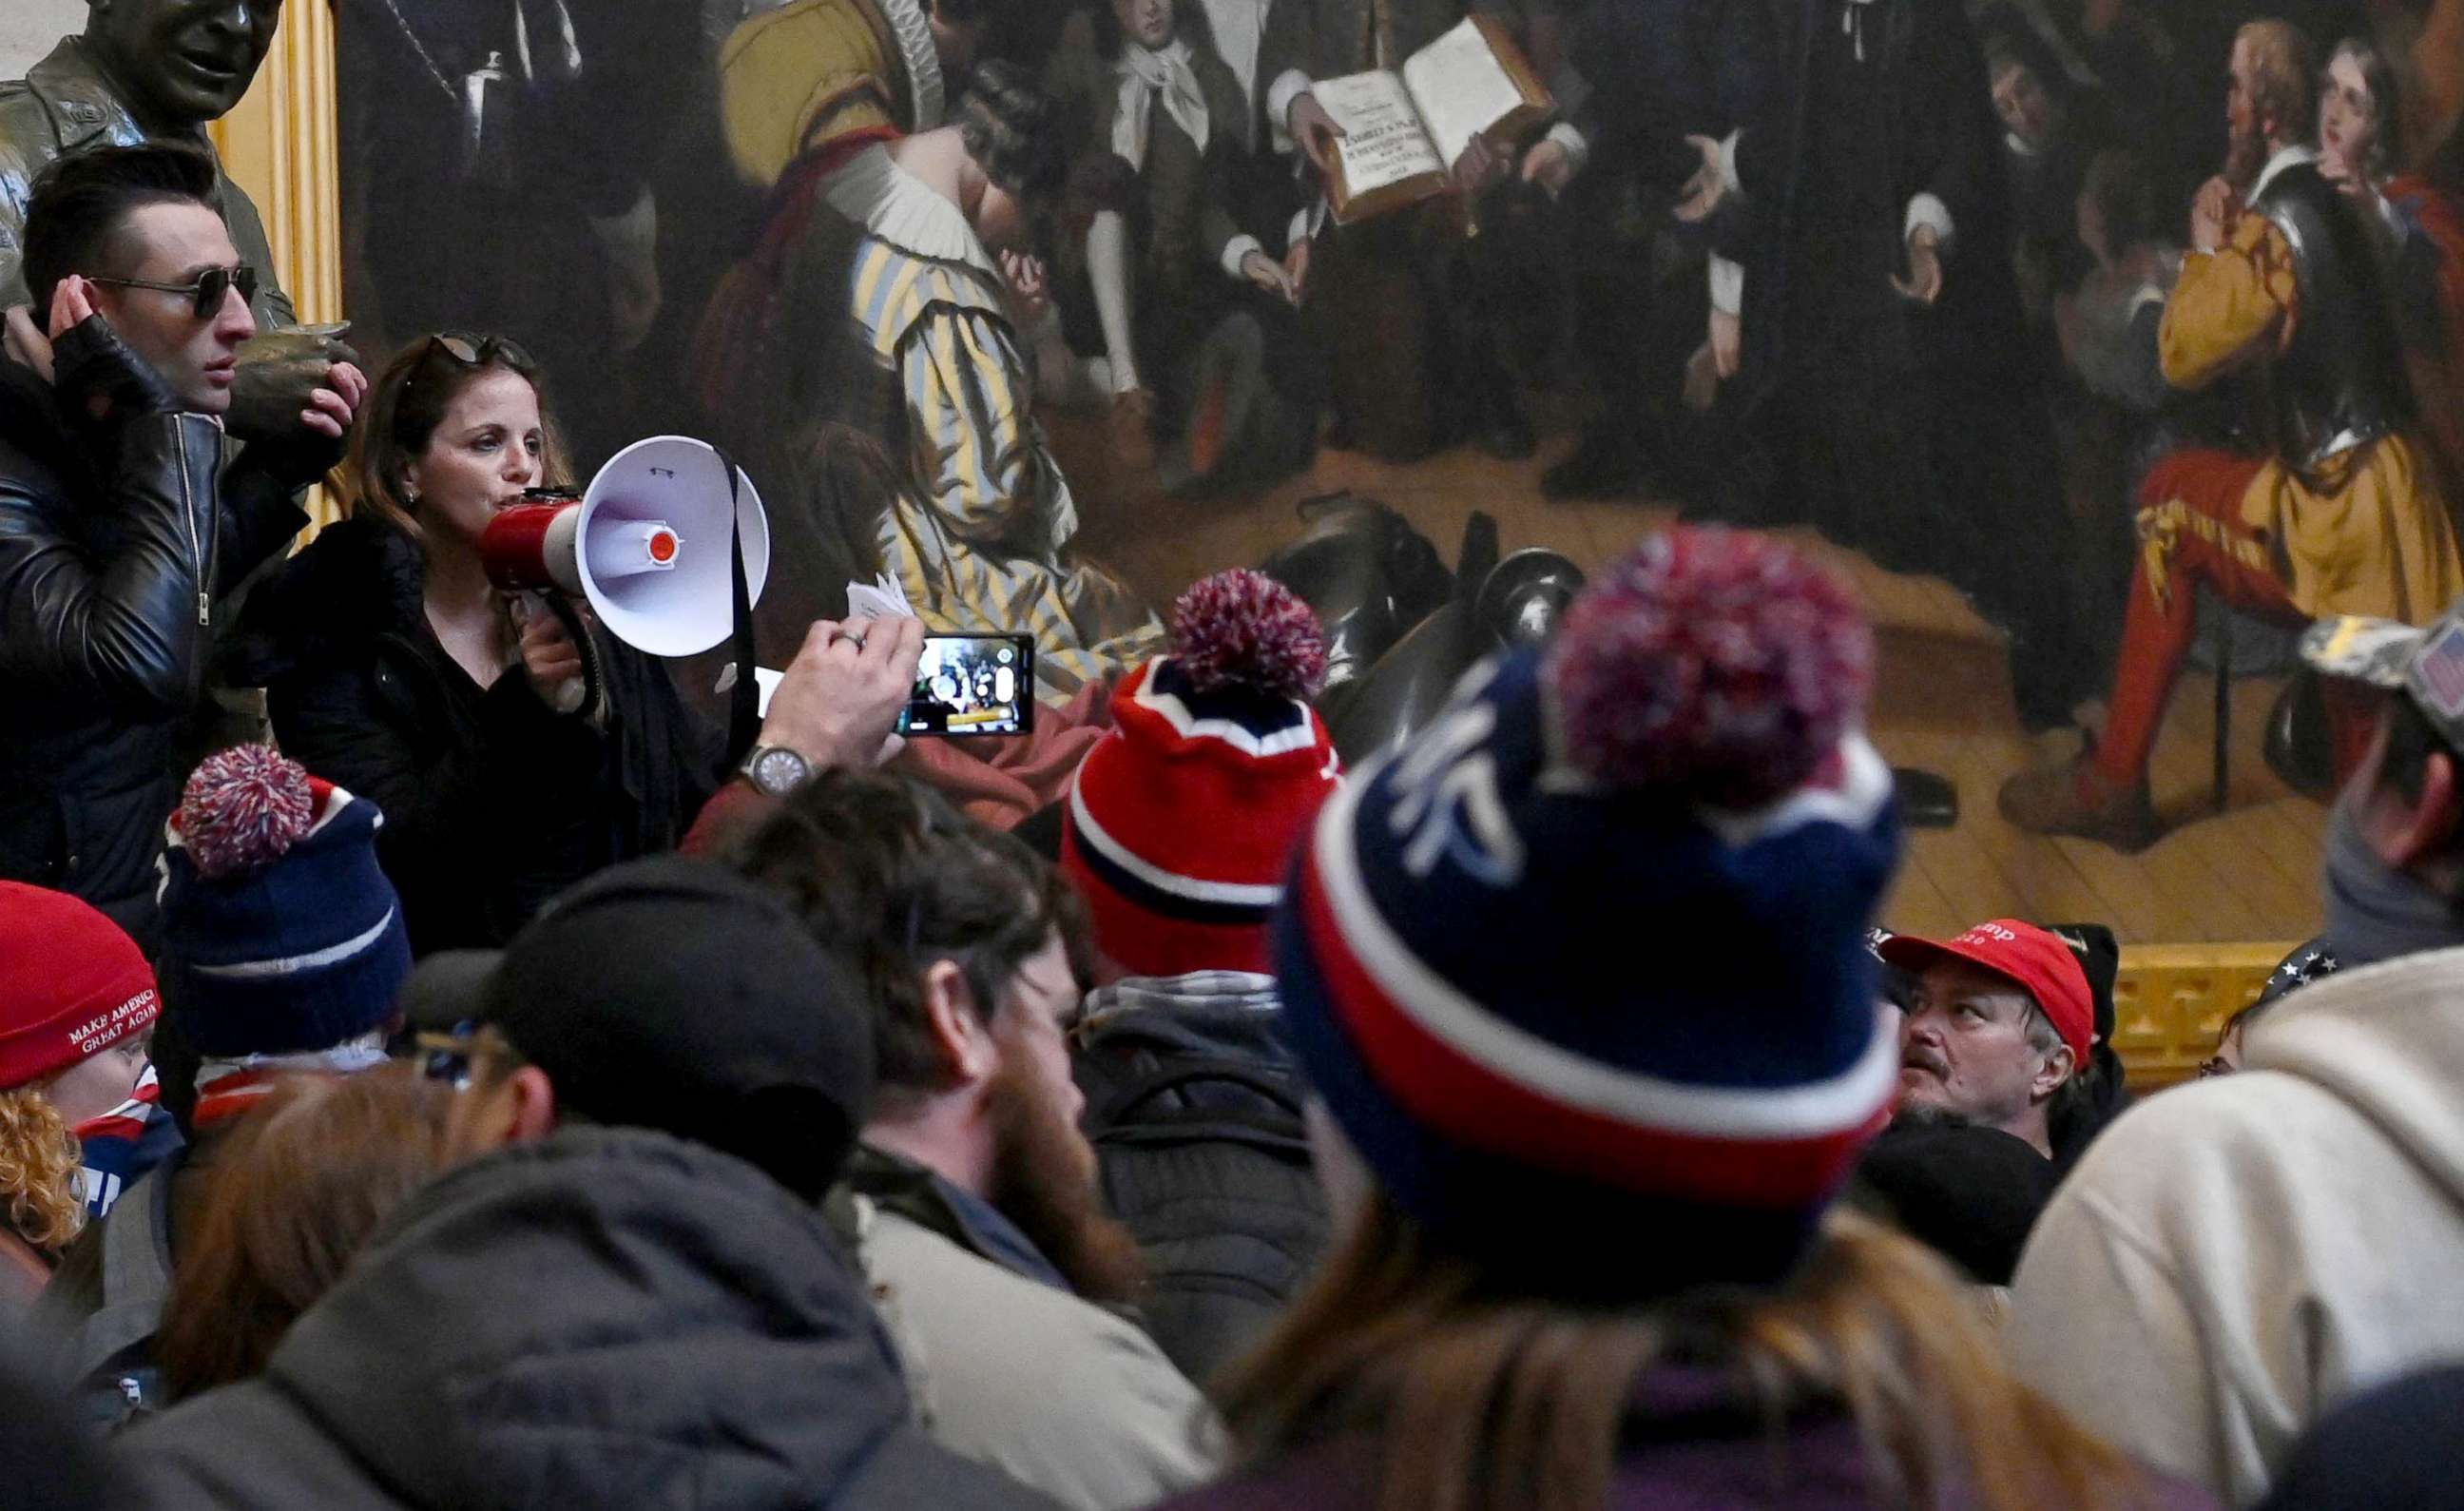 PHOTO: Dr. Simone Gold uses a bullhorn to address supporters of President Donald Trump during a riot in the US Capitol's Rotunda in Washington, Jan. 6, 2021.